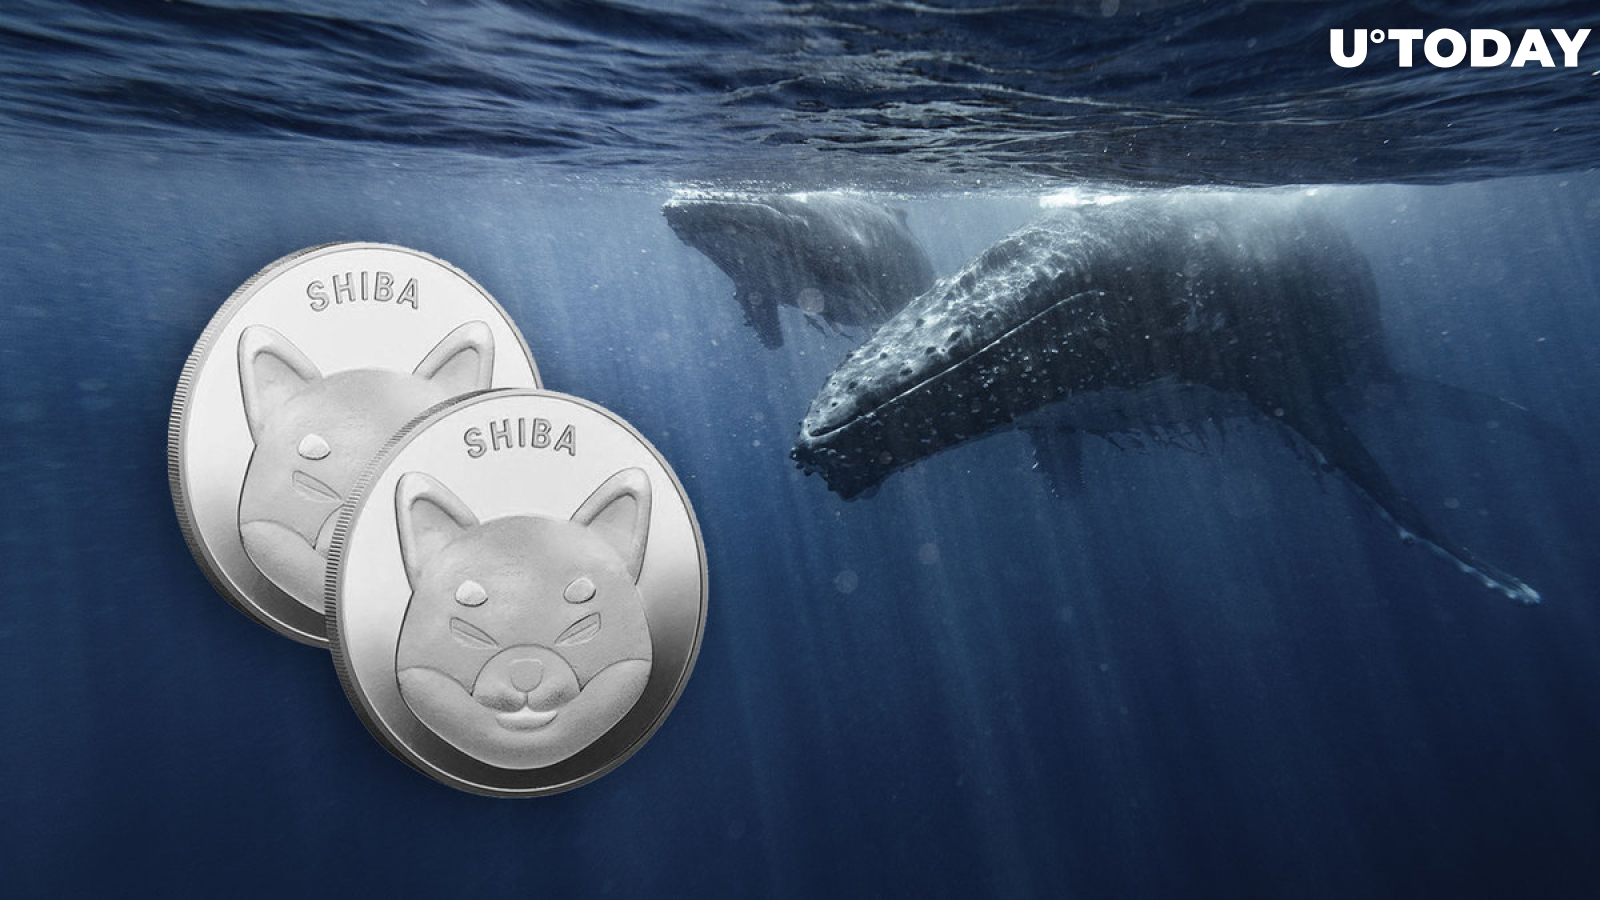 SHIB Seems to Have Crisis with Whales, Here's What It Is